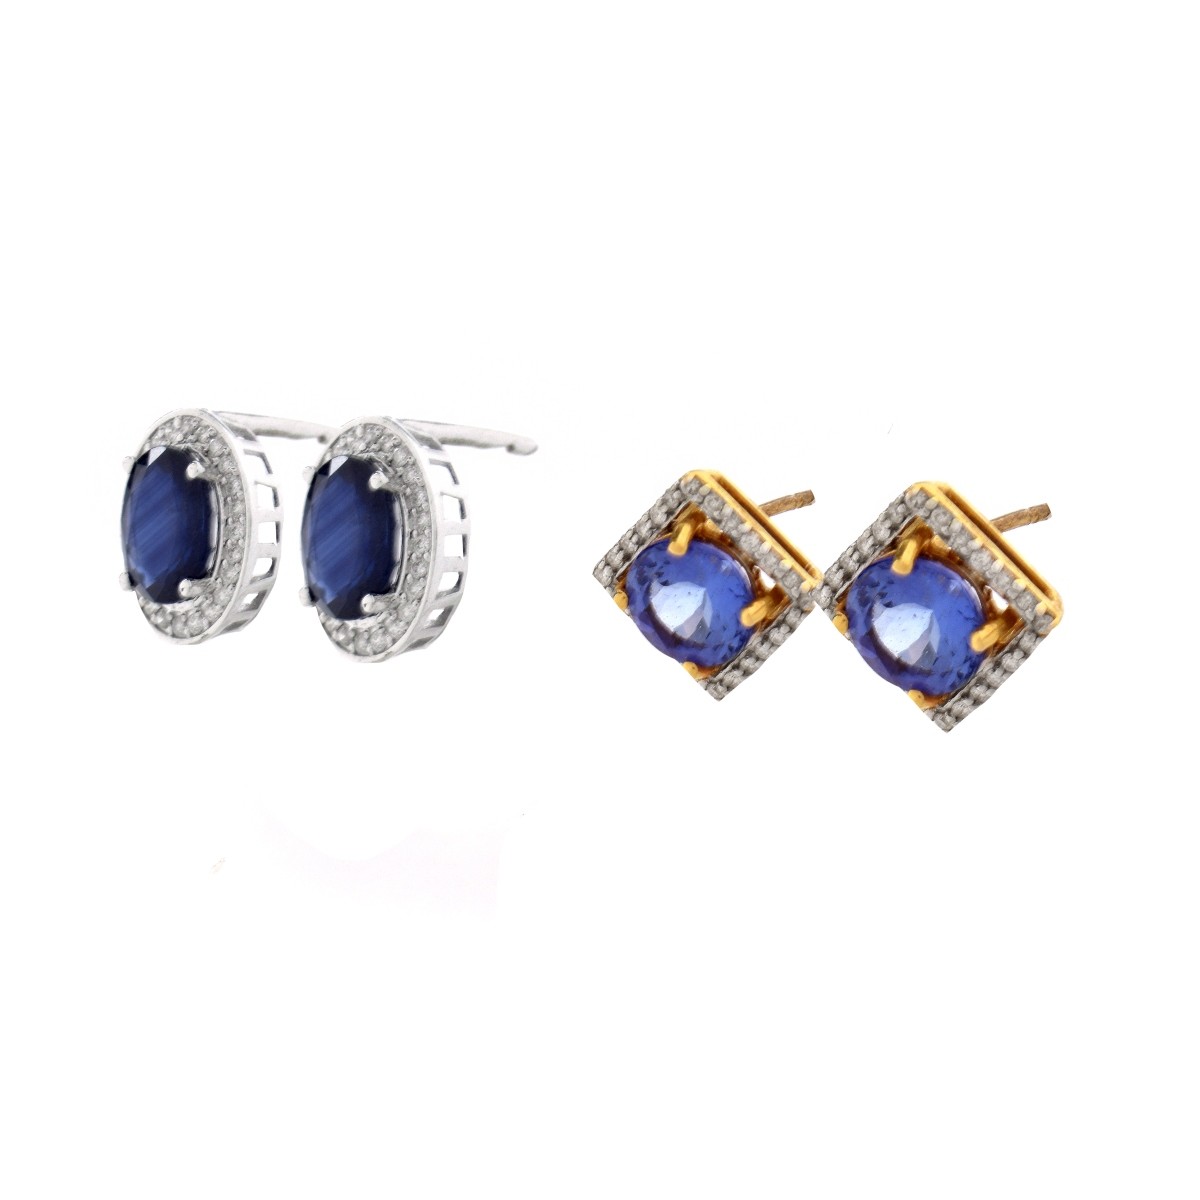 Two Pair of Gemstone and Diamond Ear Studs